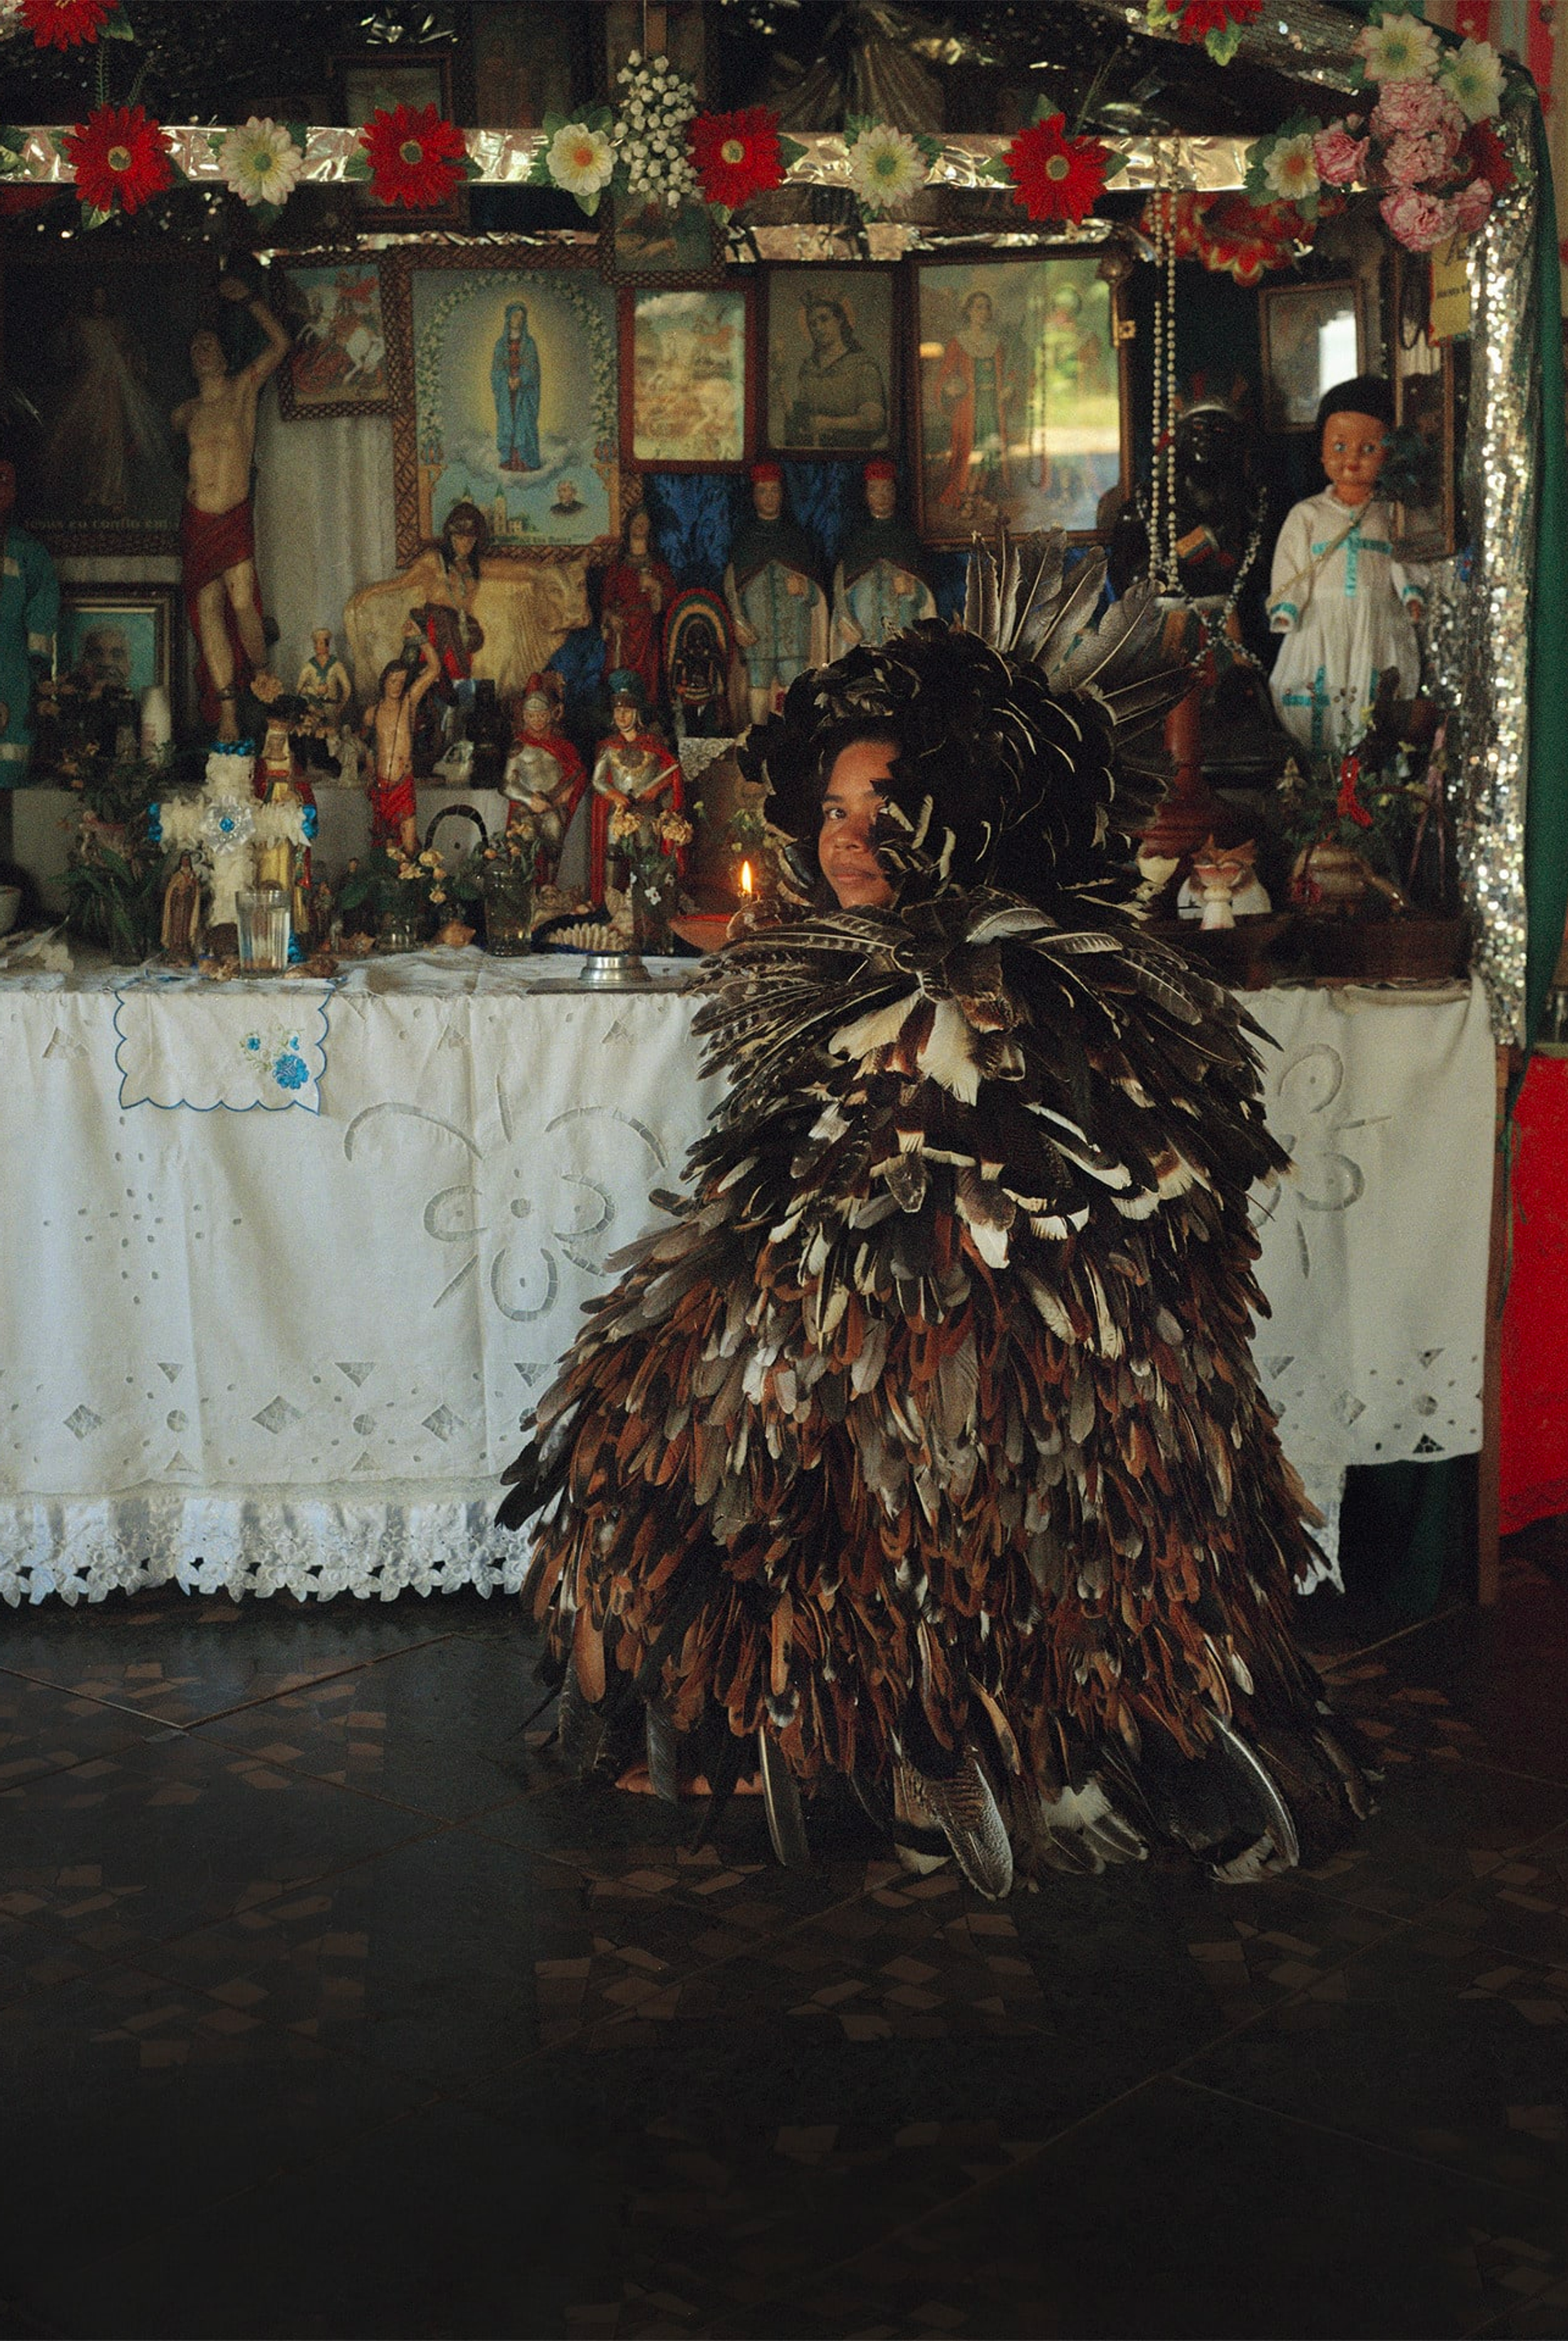 A photograph featuring a person completely dressed in feathers, crouching in front of a table decorated with model figures and paintings, turning their head to face the camera, by Fernanda Liberti. 